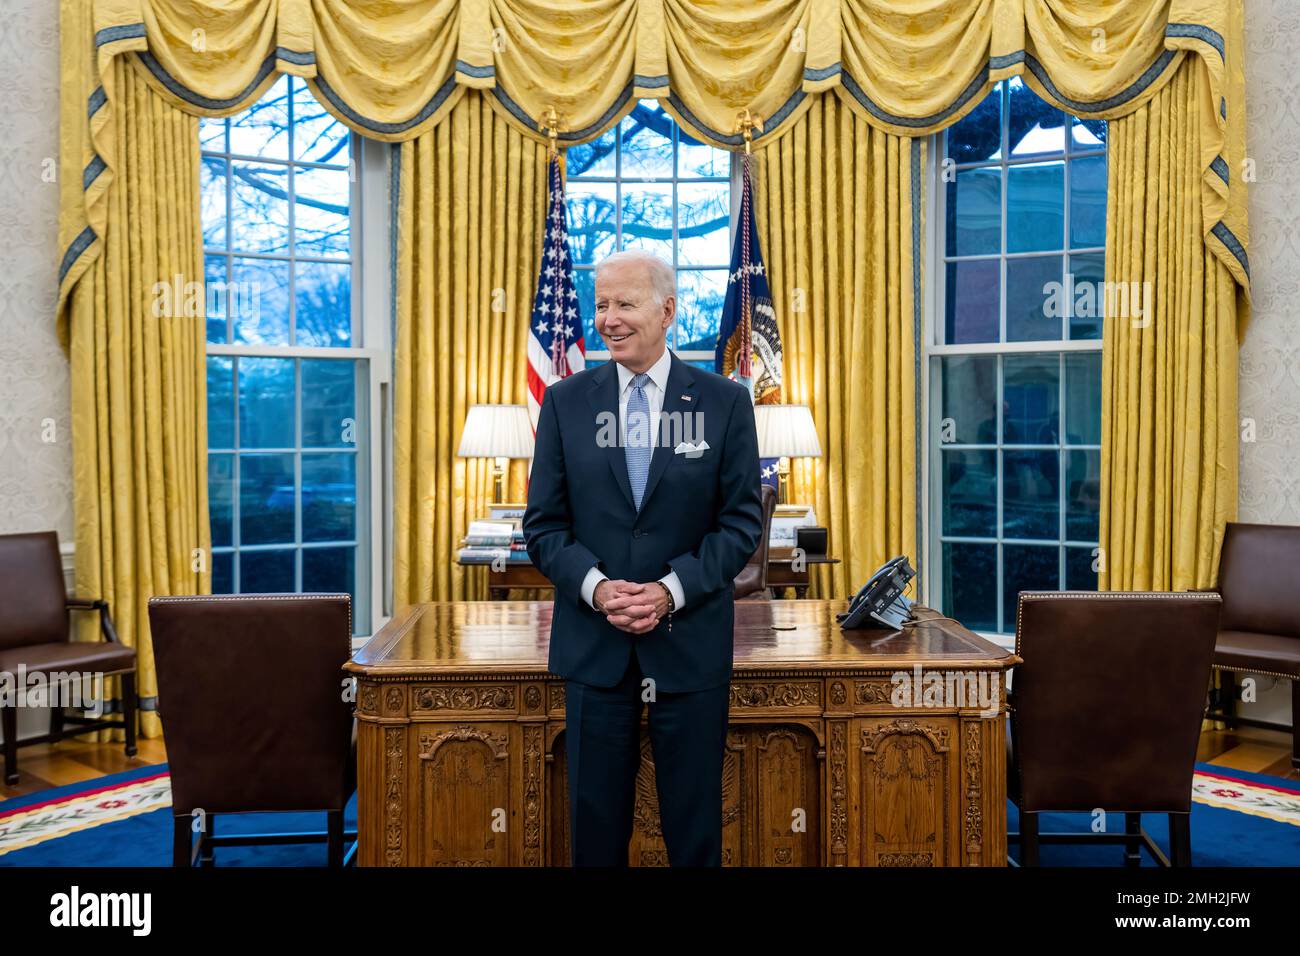 President Joe Biden prepares to greet the family of departing U.S. Army Military Aide Major Bill Yang, Friday, January 20, 2023, in the Oval Office. (Official White House Photo by Cameron Smith) Stock Photo